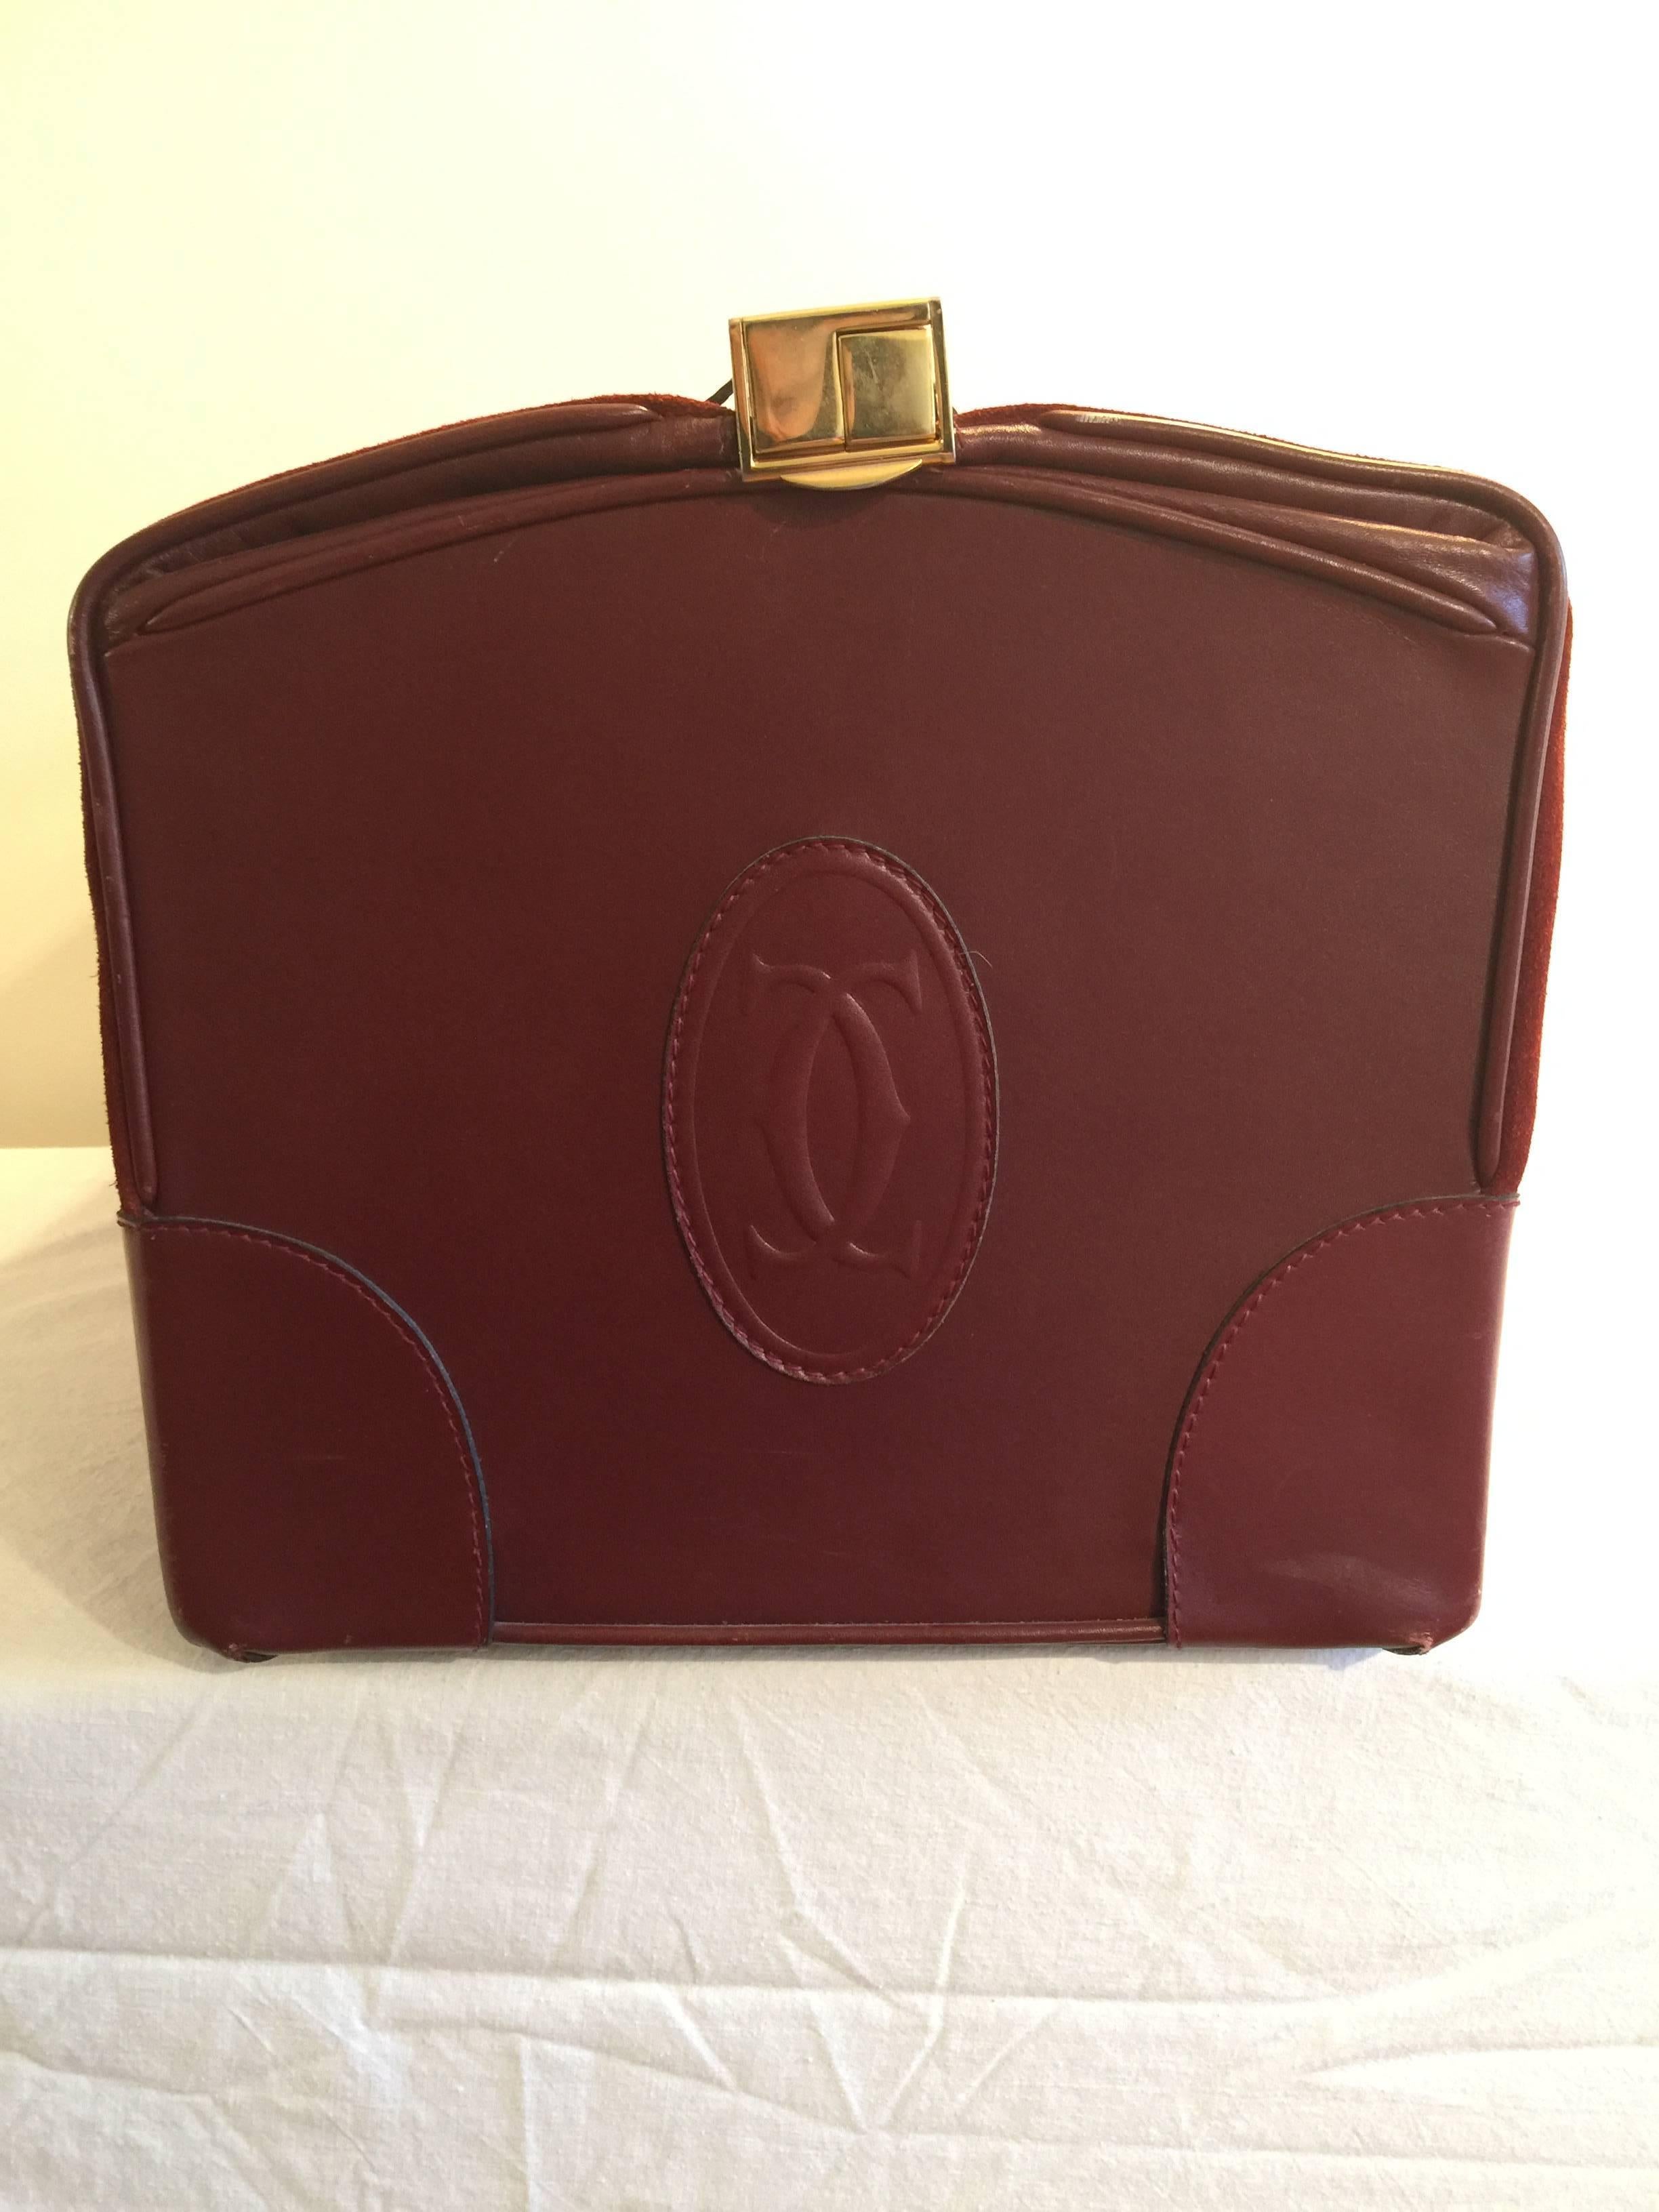 Authentic must de Cartier vintage Suede collection, 1984 (production ended 1983/1984) including booklet, key and dust bag. The overall condition of the luggage is very good except for handles which broke. Handles are perfect but the wrap ring screws